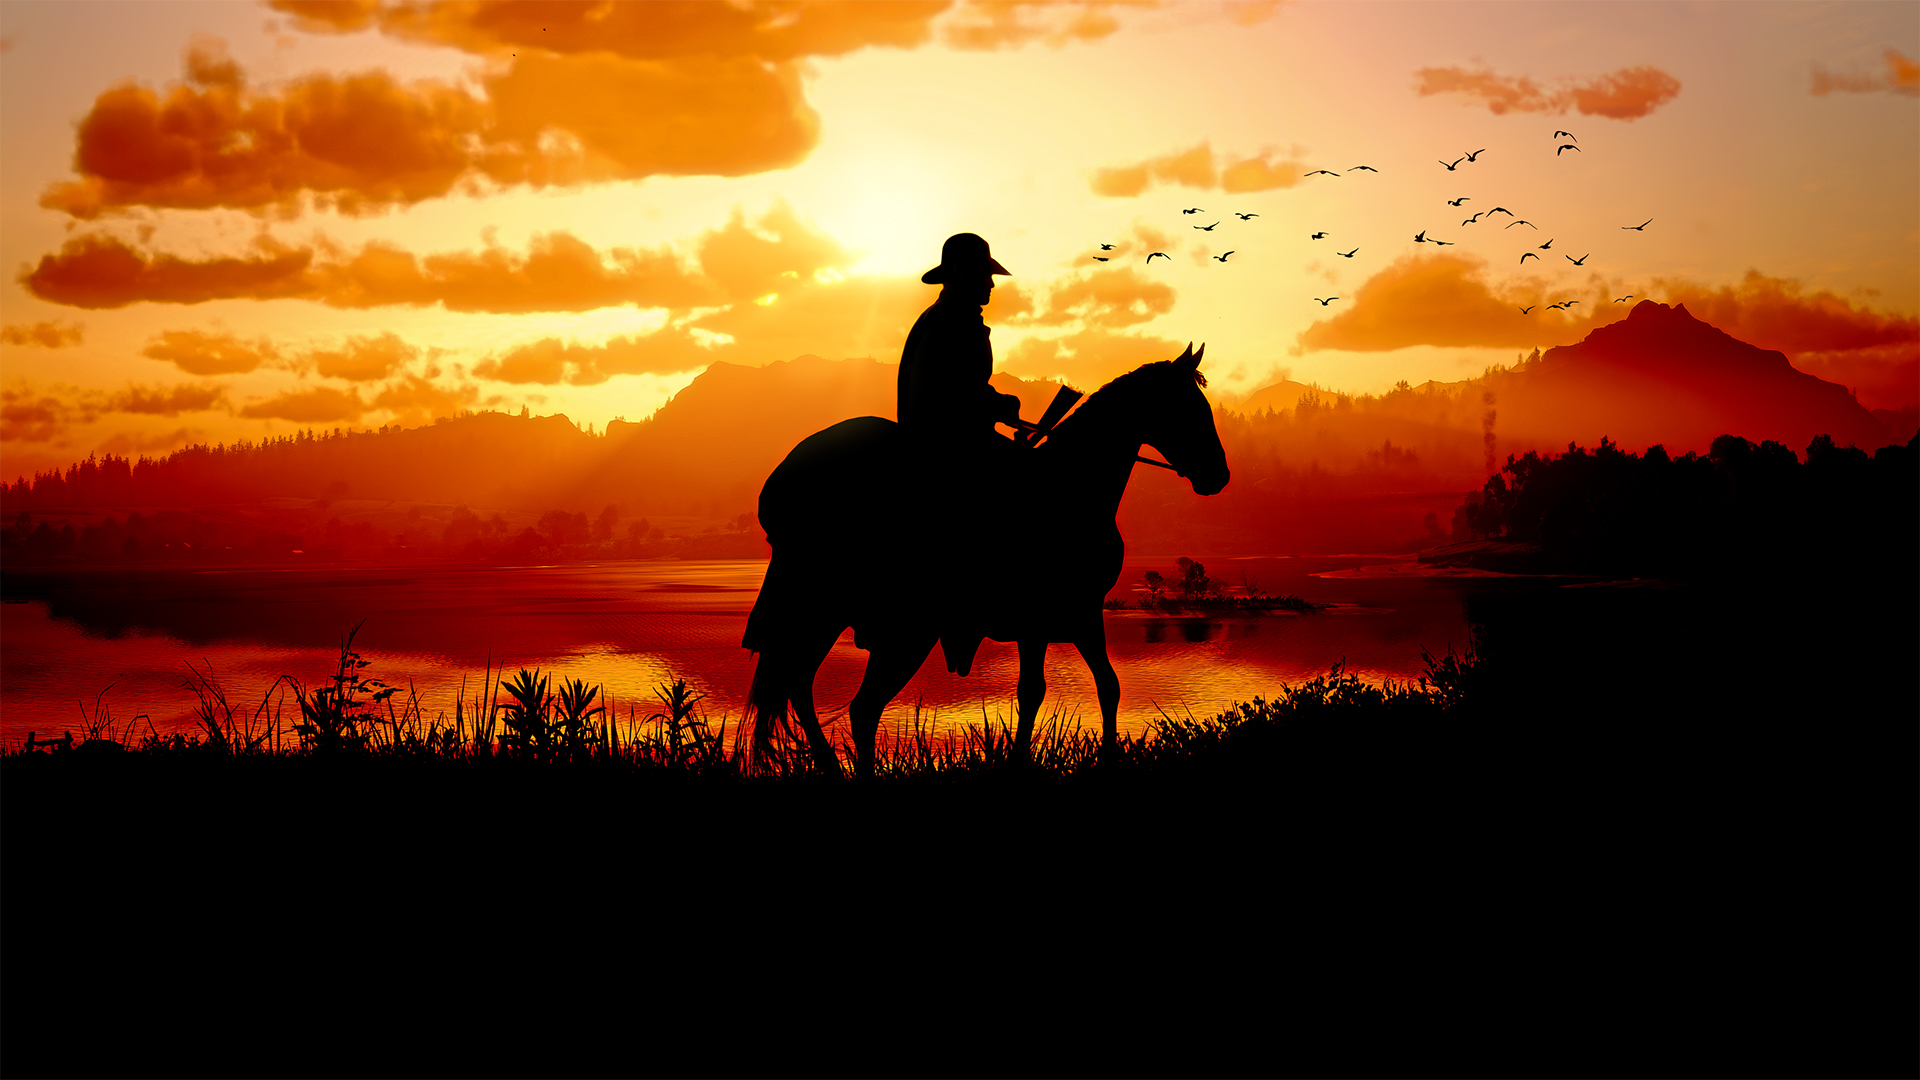 Red Dead Redemption 8k Minimal Wallpapers